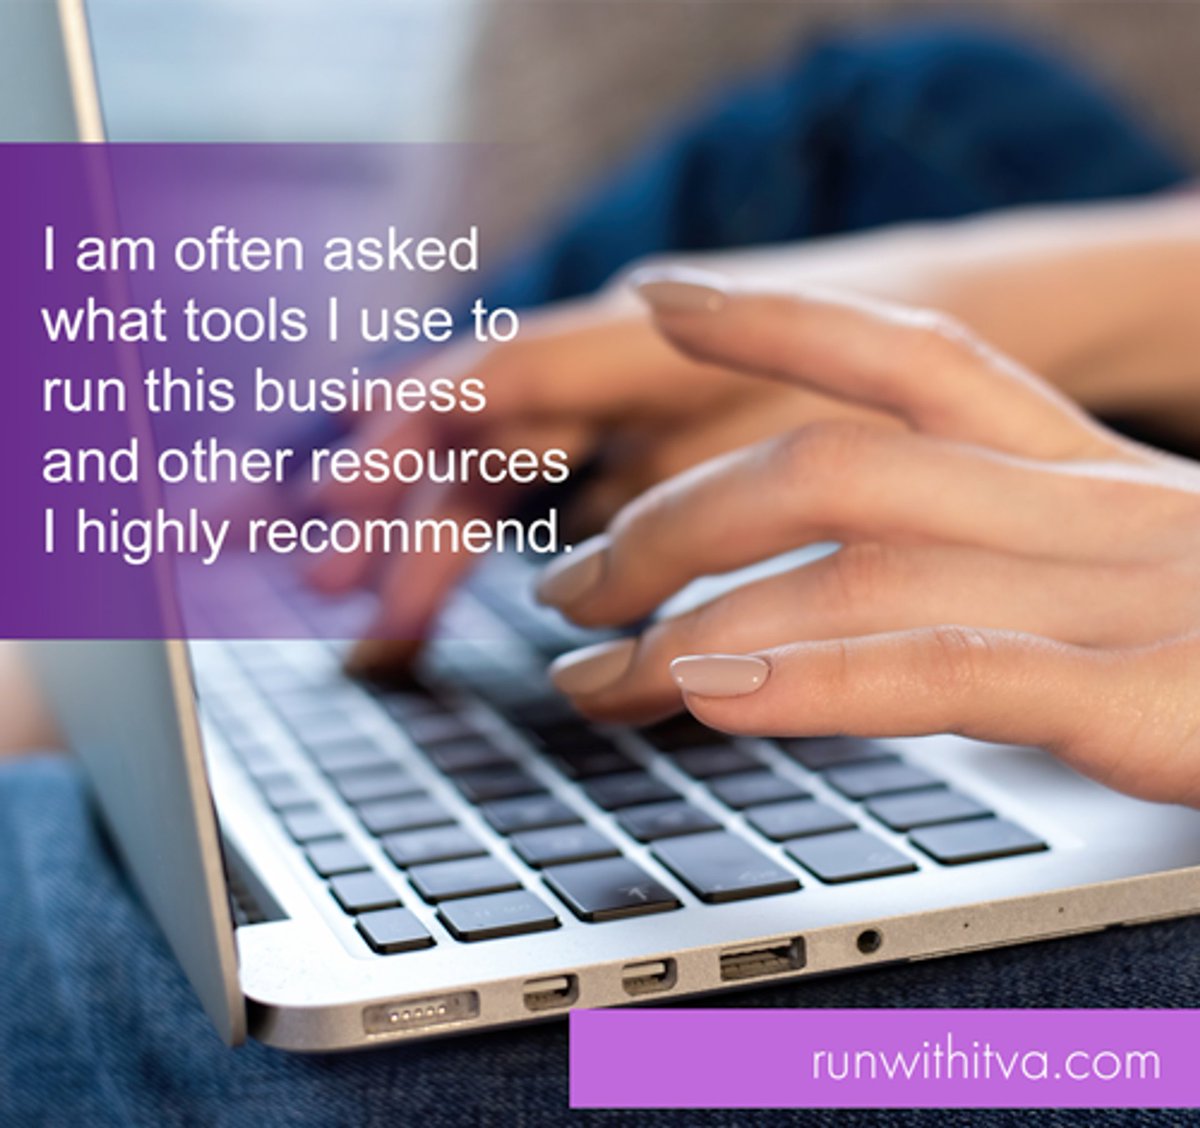 I'm often asked what tools and resources I recommend for various business needs. Go here to see the list of resources I recommend 👇 runwithitva.com/resources/ #growbusiness #growthhack #virtualassistance #growyourbusinessonline #strategicplanning #socialmediagrowth